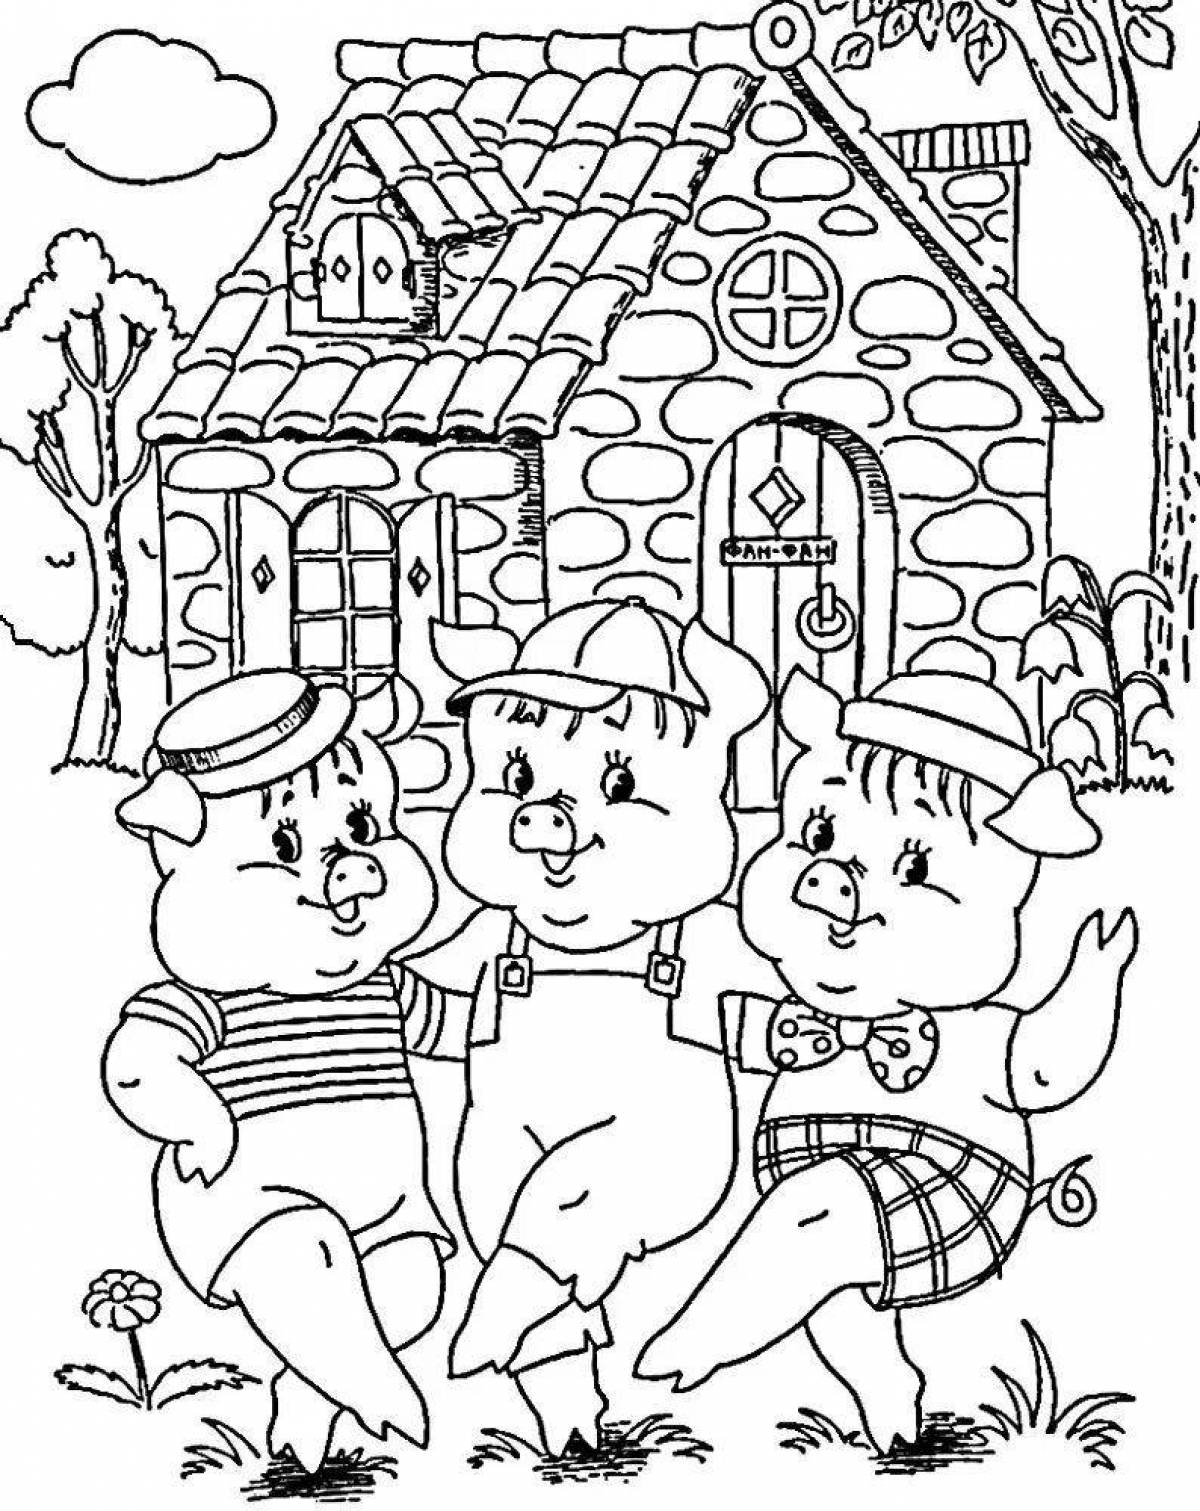 Fantastic fairy tale character coloring book for kids